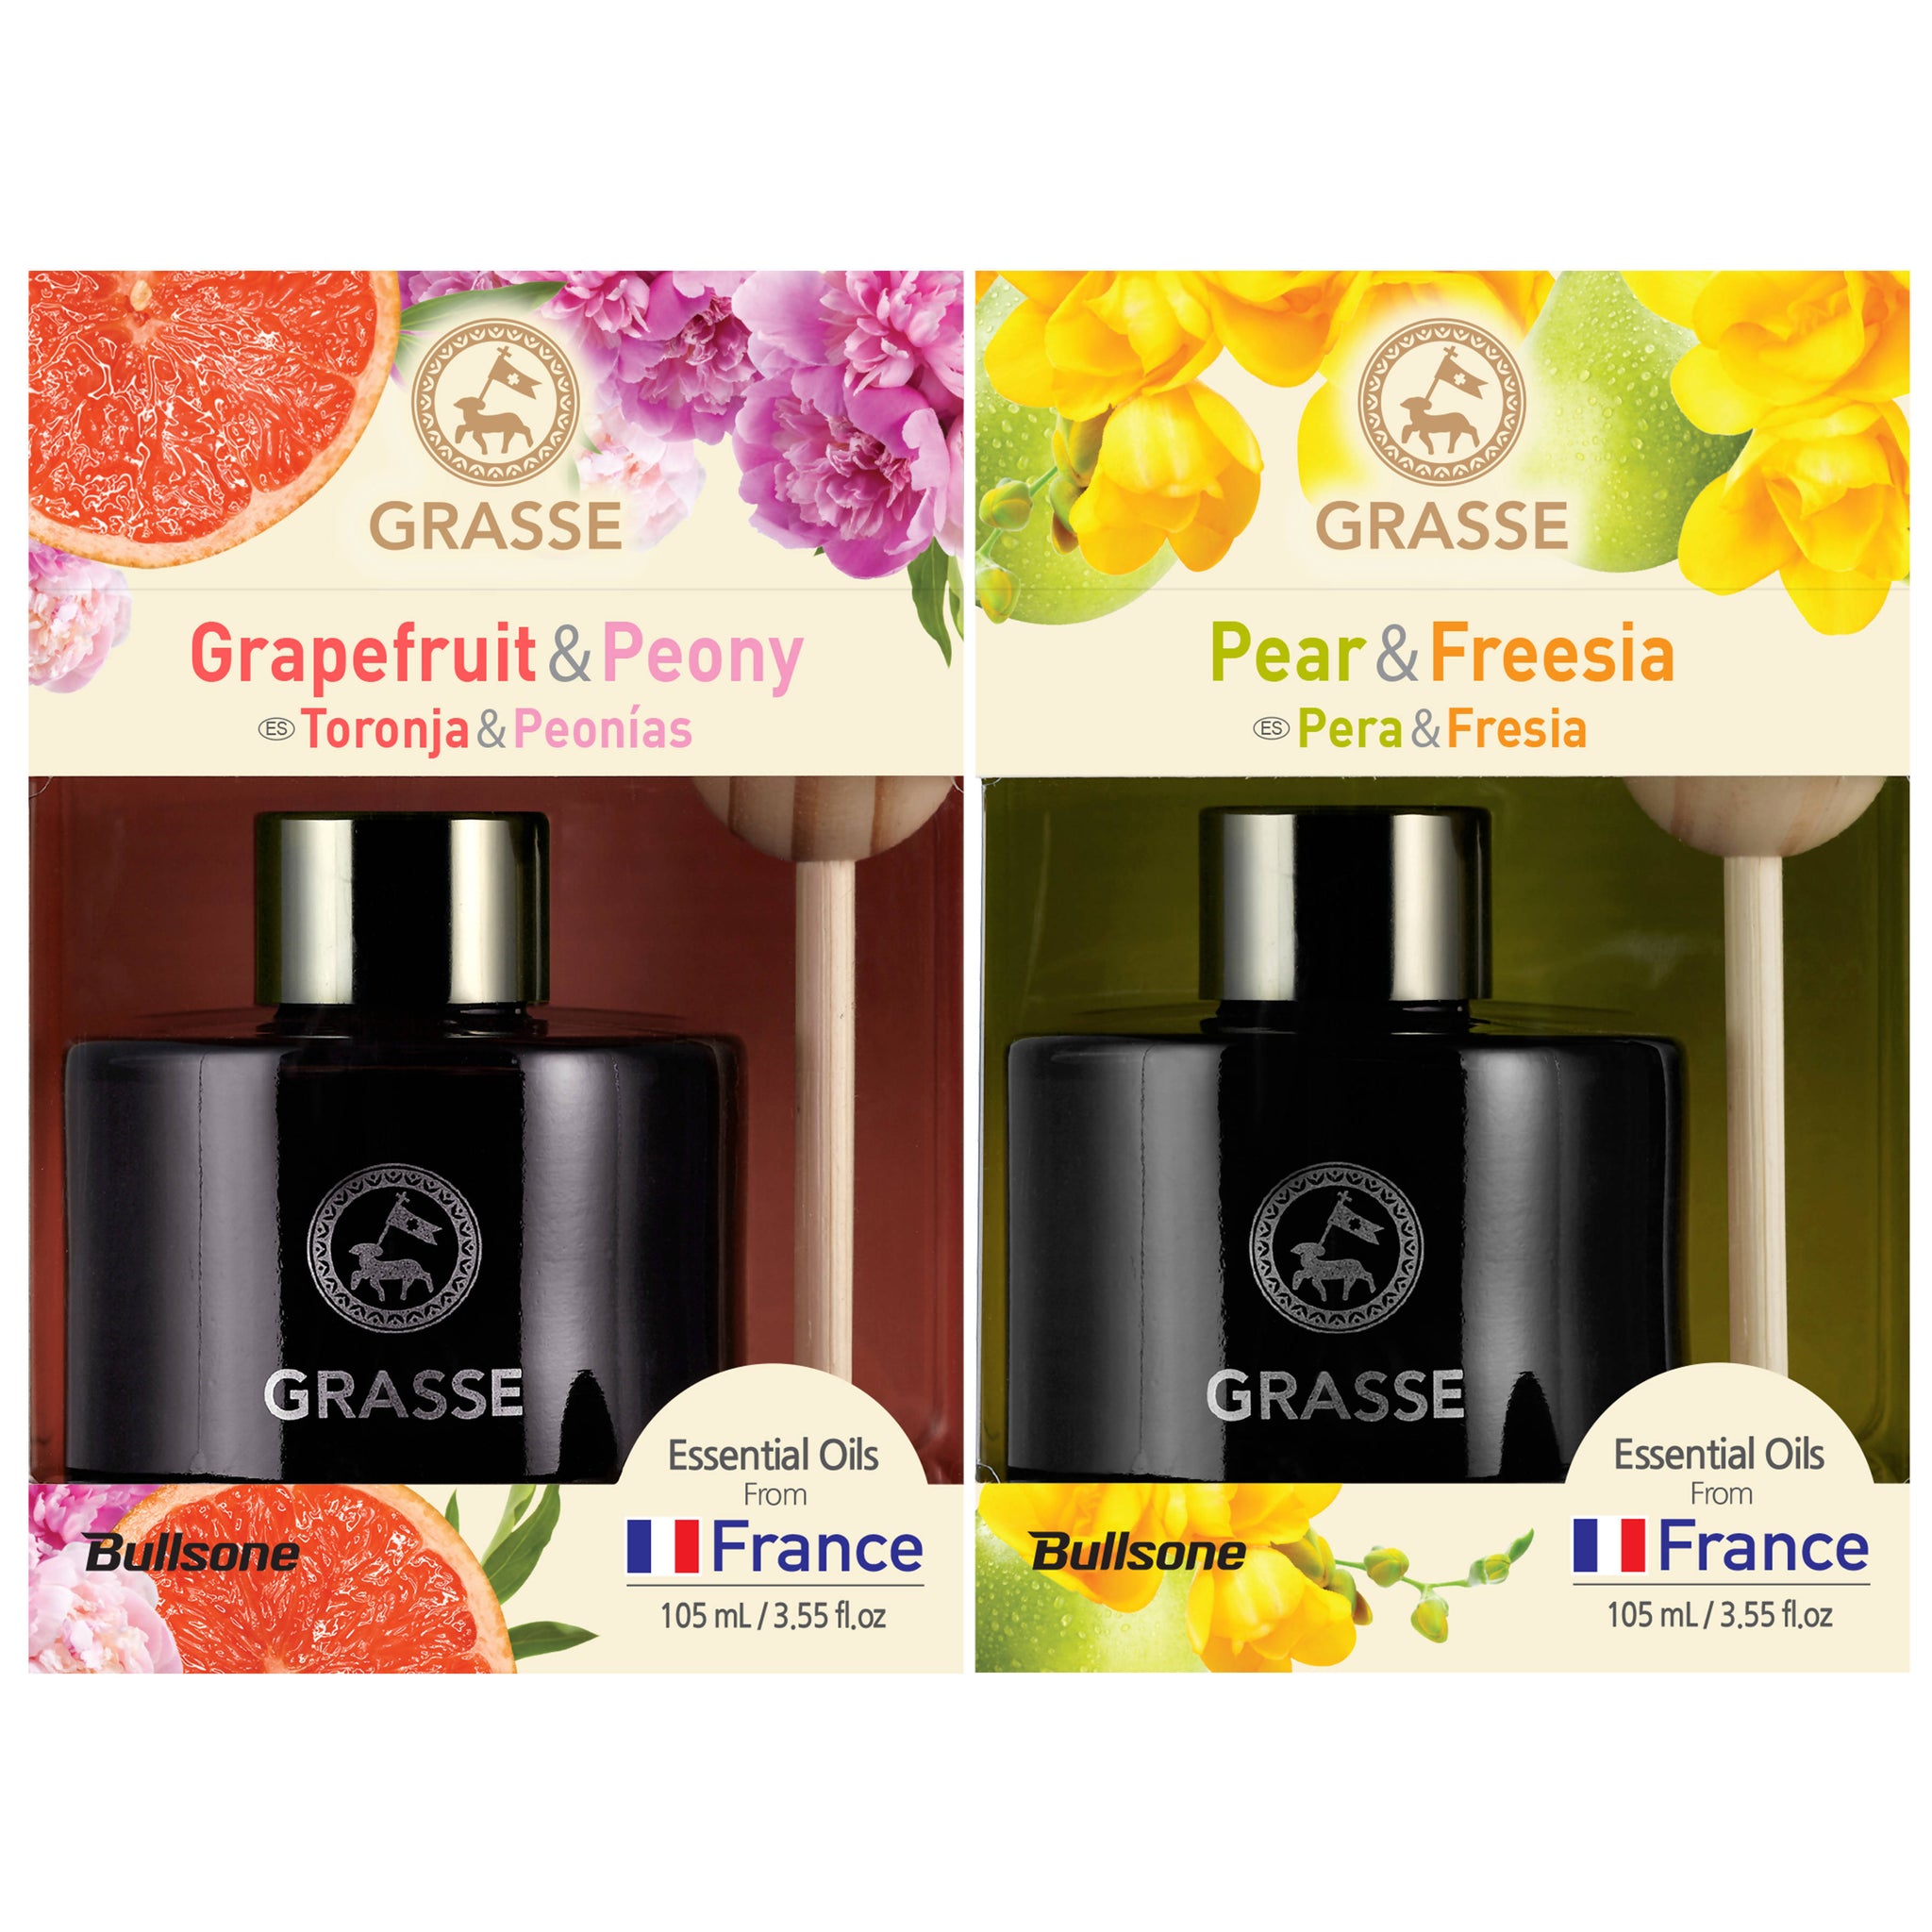 [10% OFF LIMITED TIME ONLY] Bullsone Car Diffuser Natural Essential Oil - Grapefruit&Peony + Pear&Freesia (2Pack)